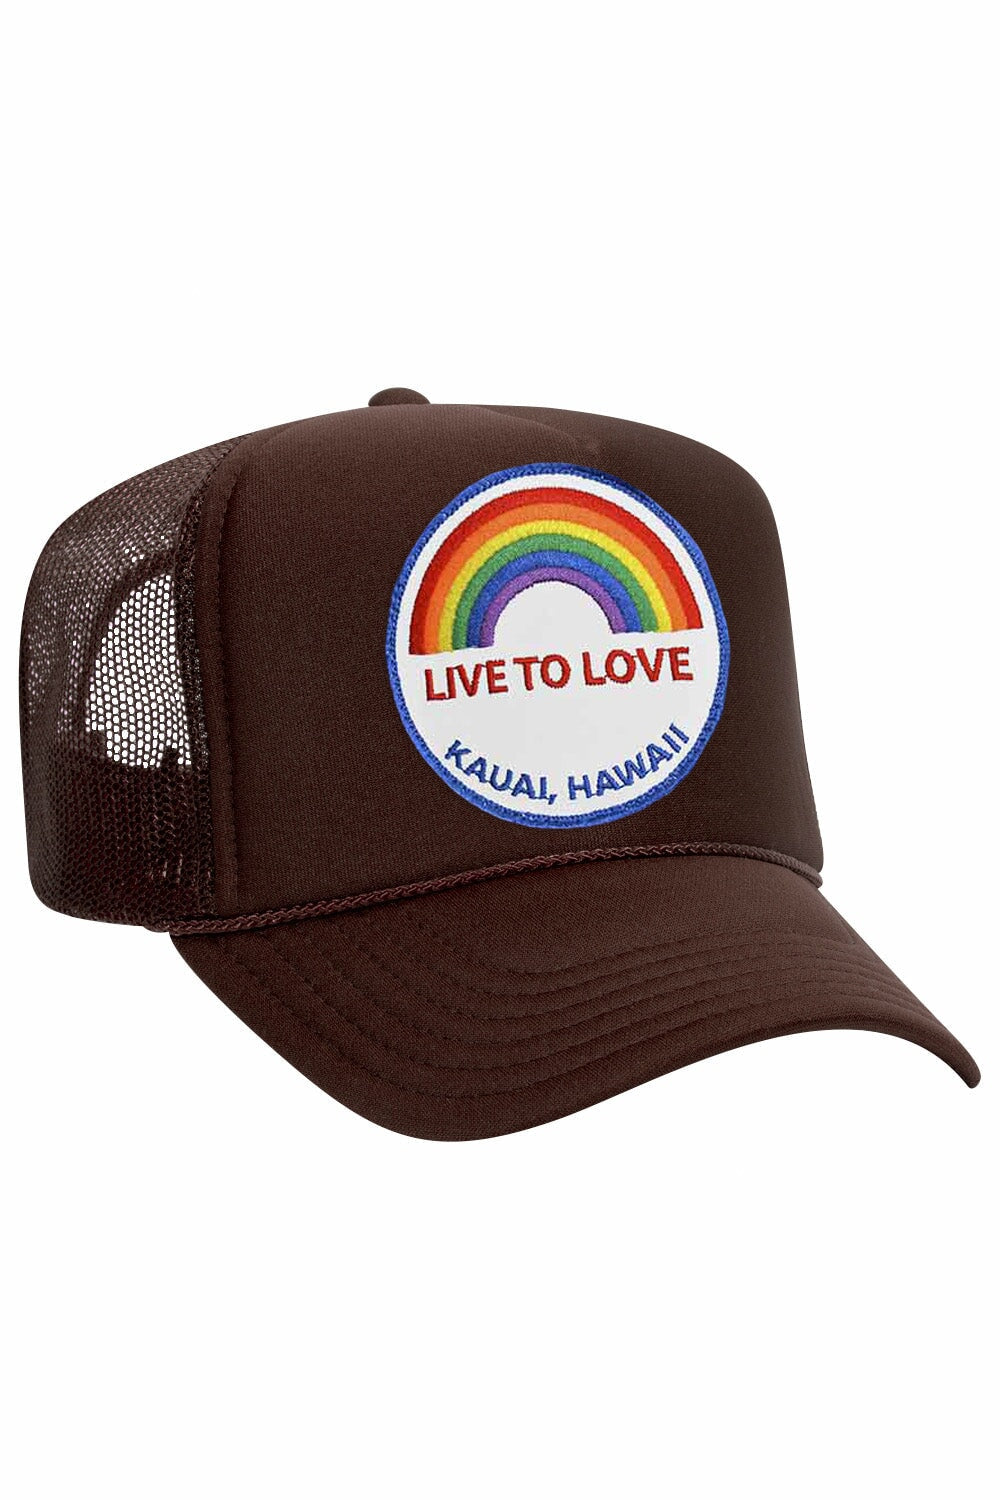 LIVE TO LOVE VINTAGE TRUCKER HAT HATS Aviator Nation BROWN OS 